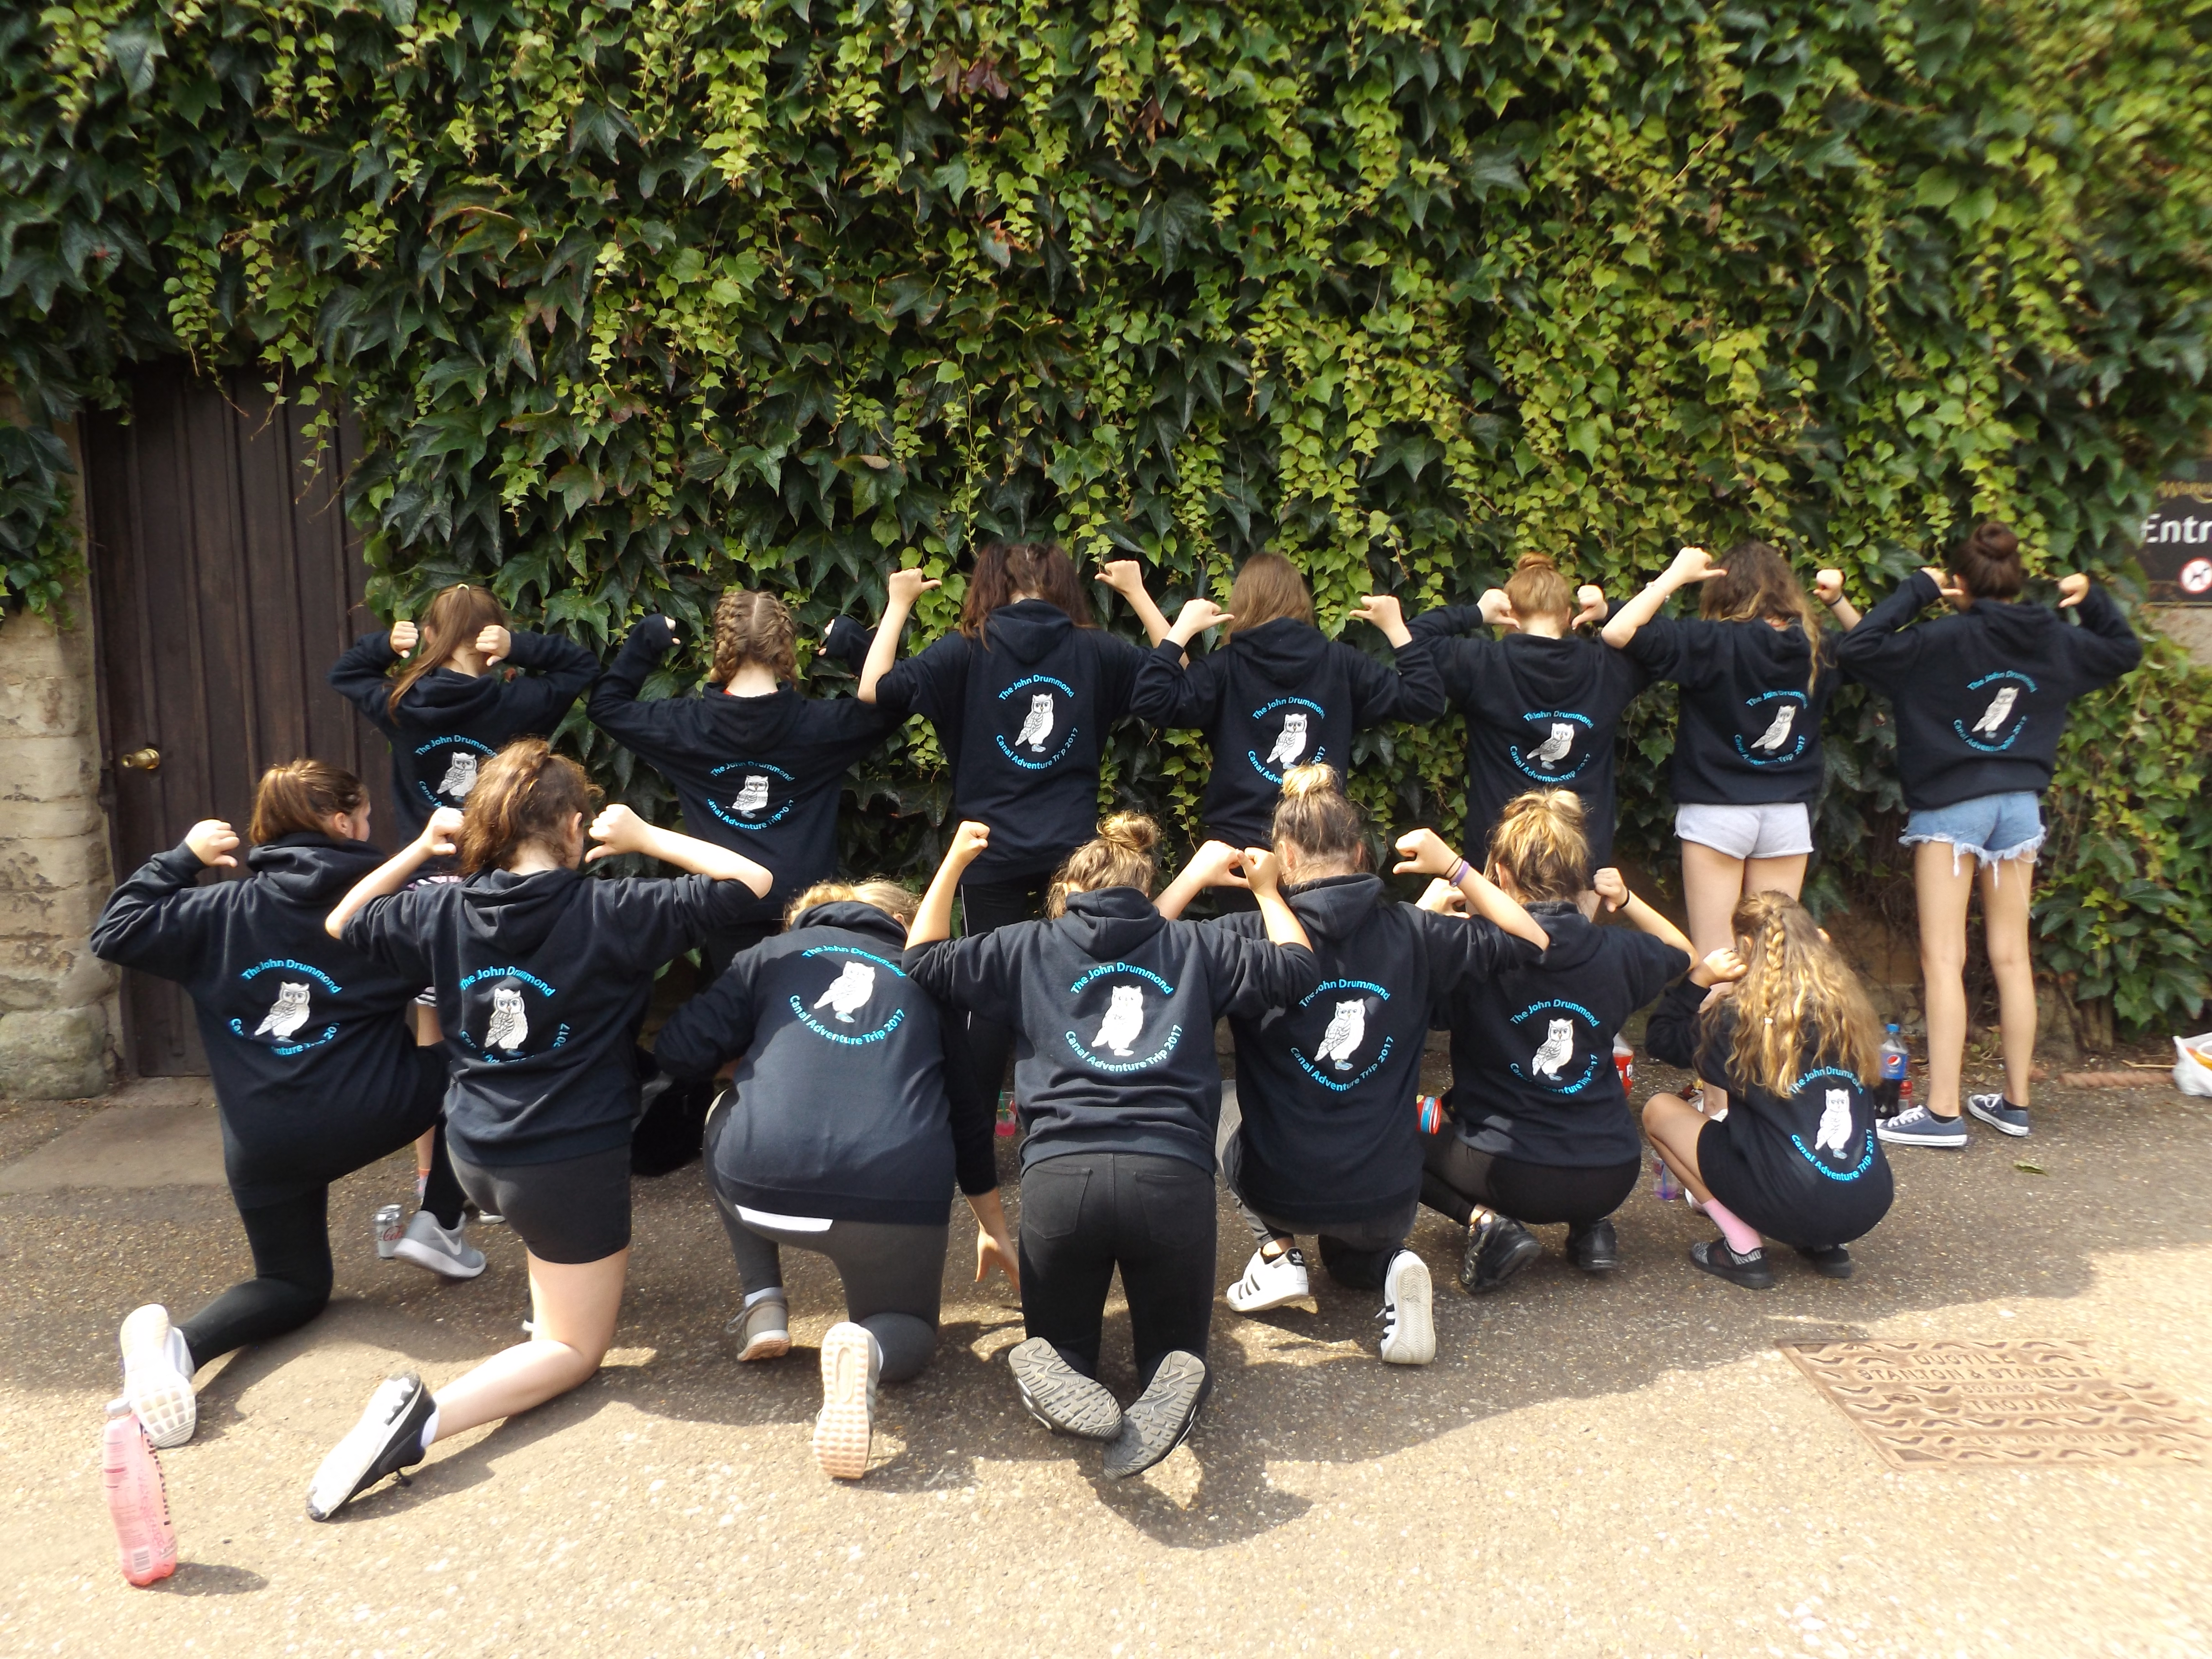 pupils at oxclose show their john drummond trust logos on their hoodies